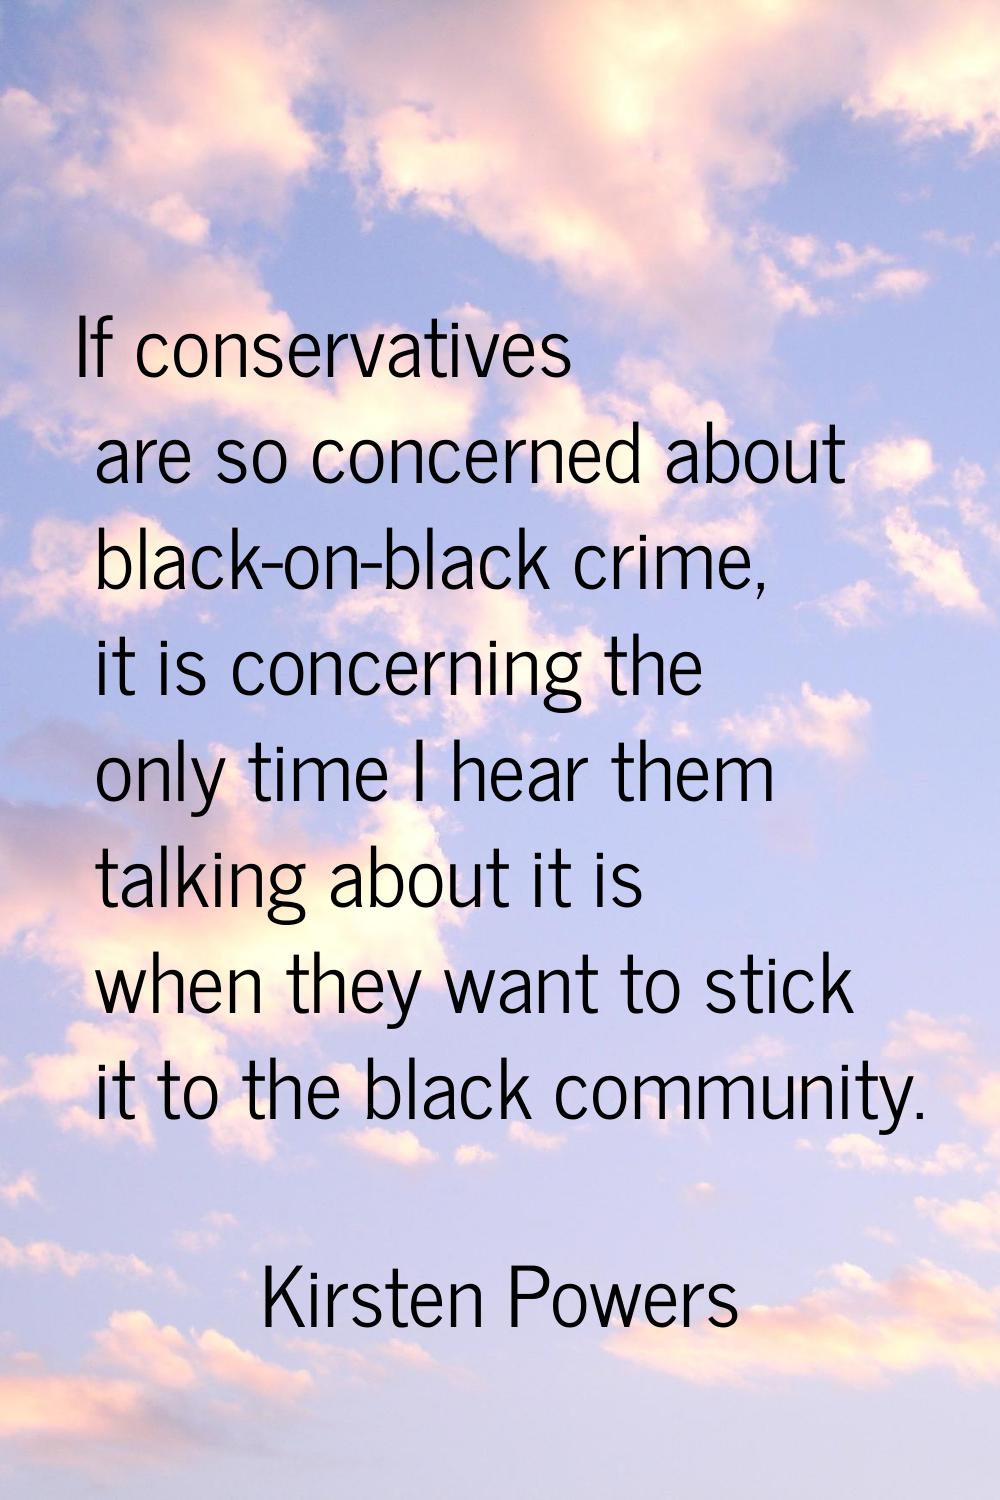 If conservatives are so concerned about black-on-black crime, it is concerning the only time I hear